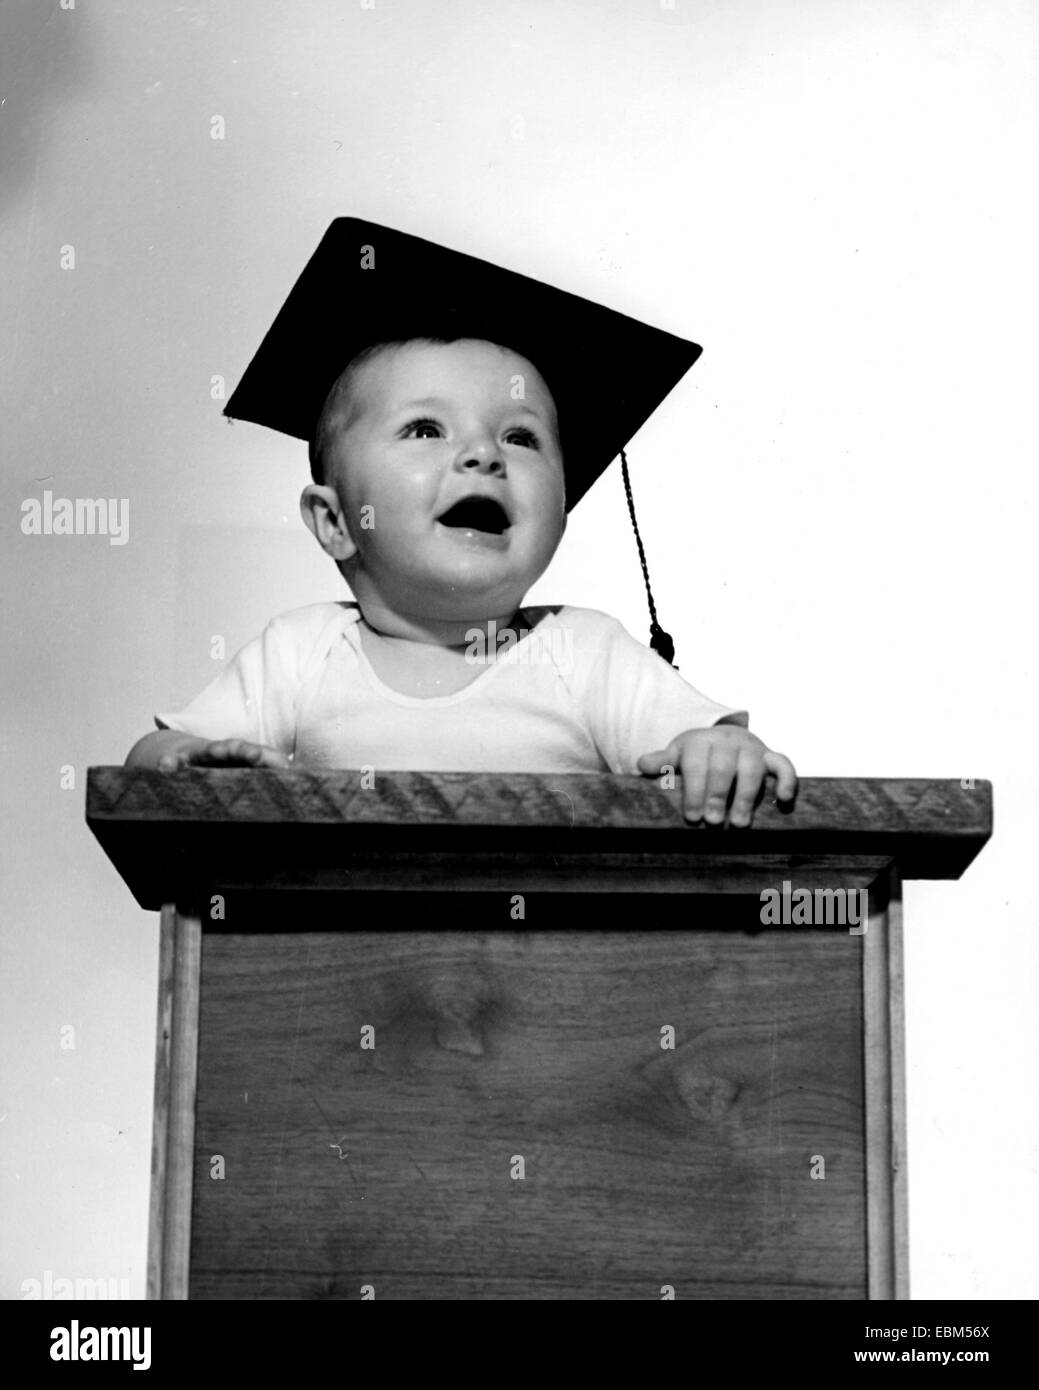 BOY WITH MORTAR BOARD Stock Photo